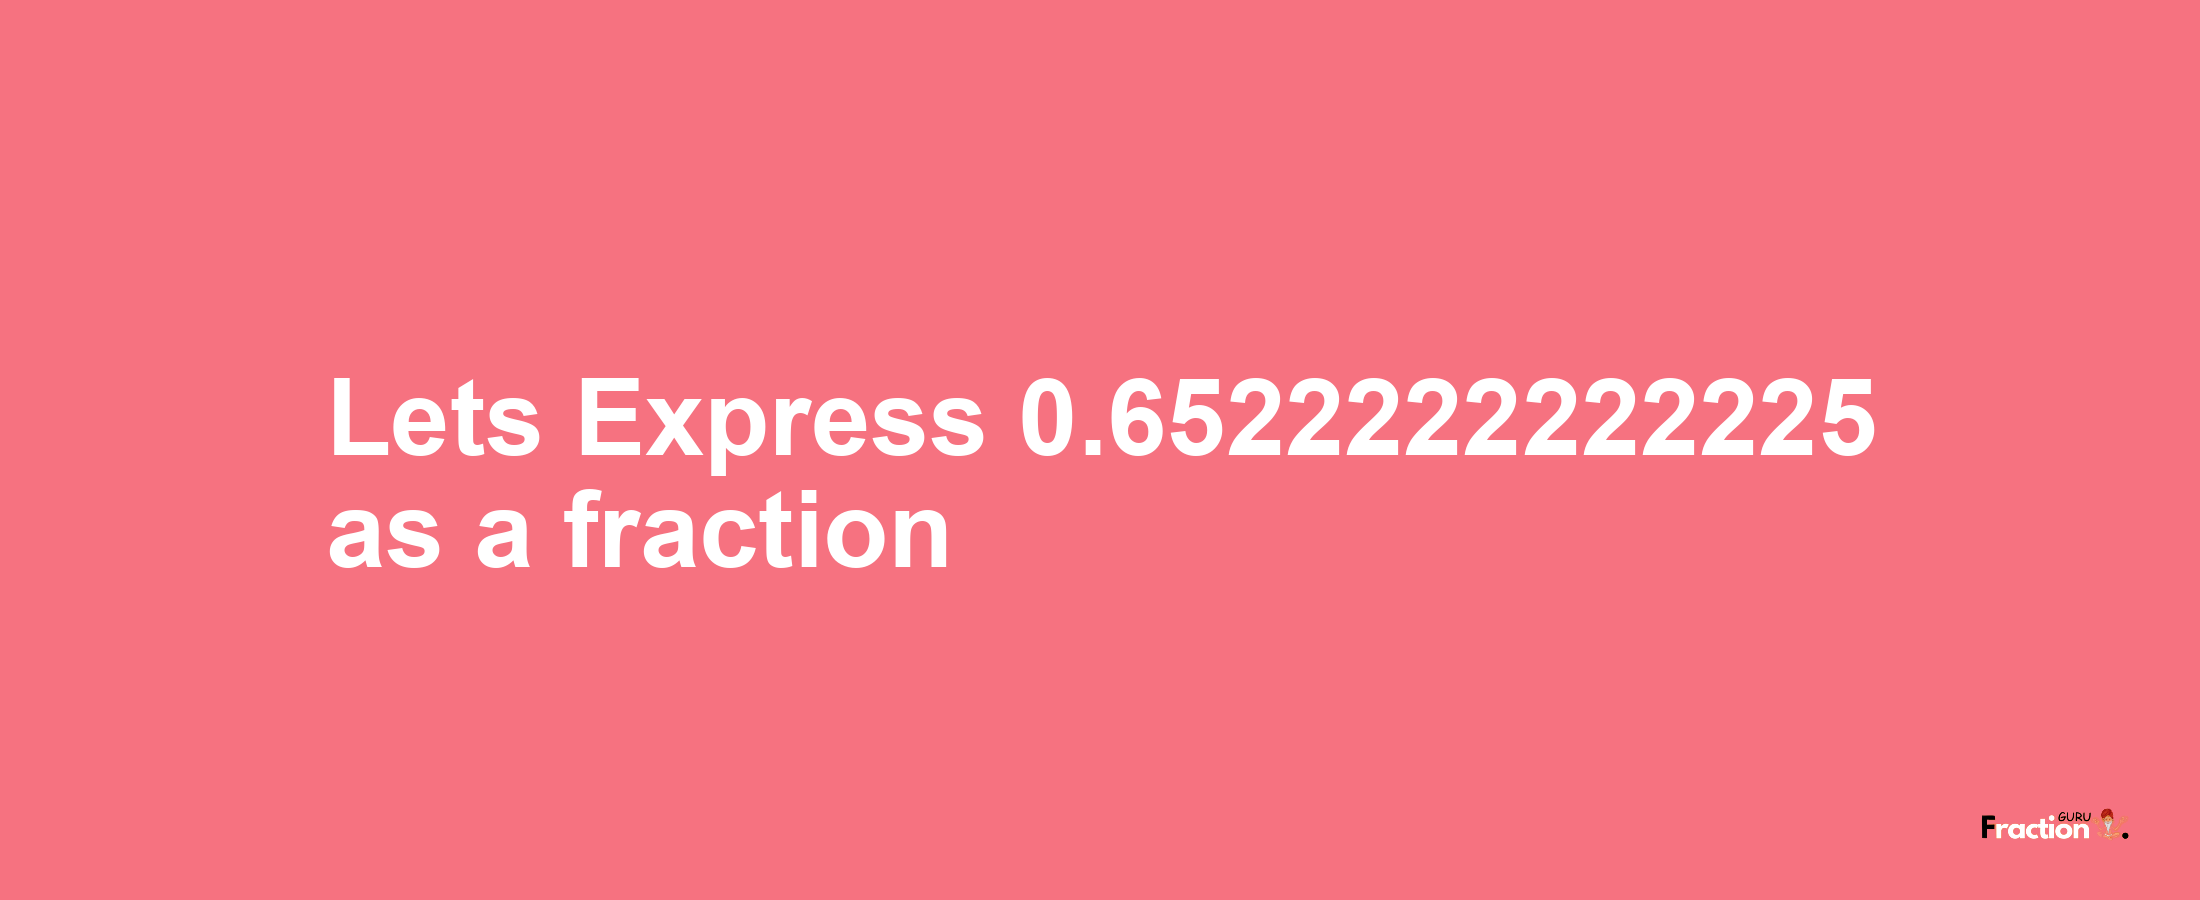 Lets Express 0.6522222222225 as afraction